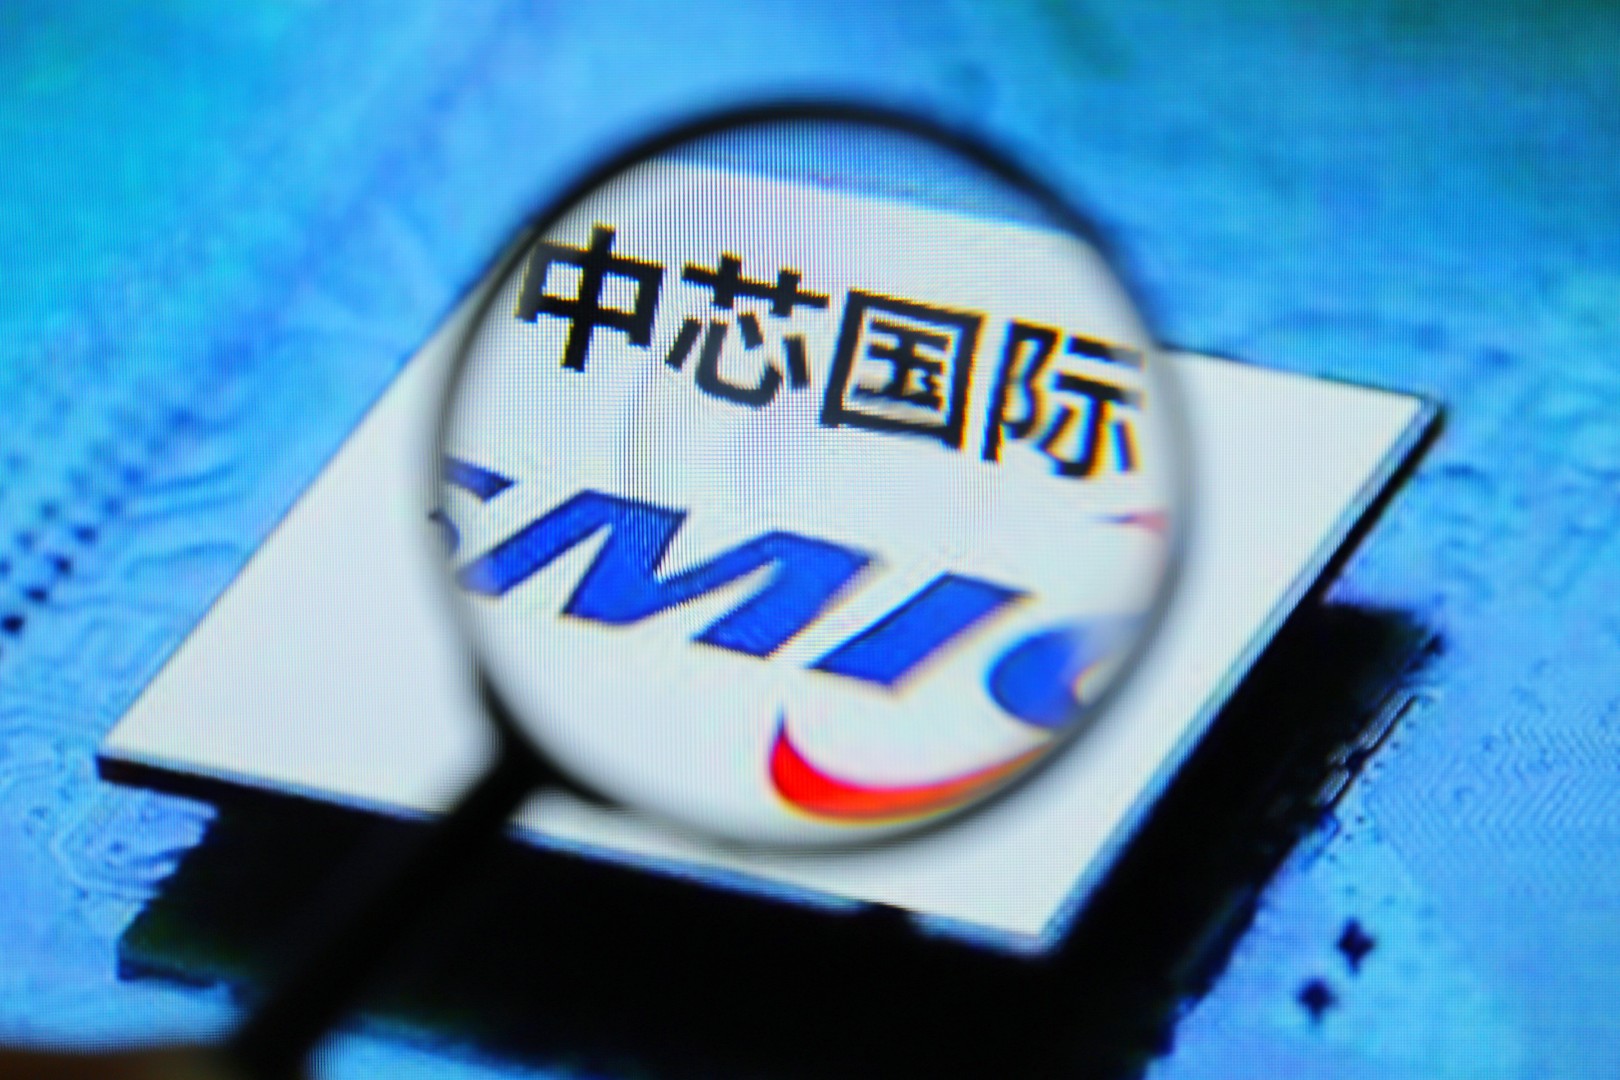 China S Chip Champion Smic Offers Executives Us 3 7 Million In Shares In Effort To Retain Semiconductor Talent South China Morning Post